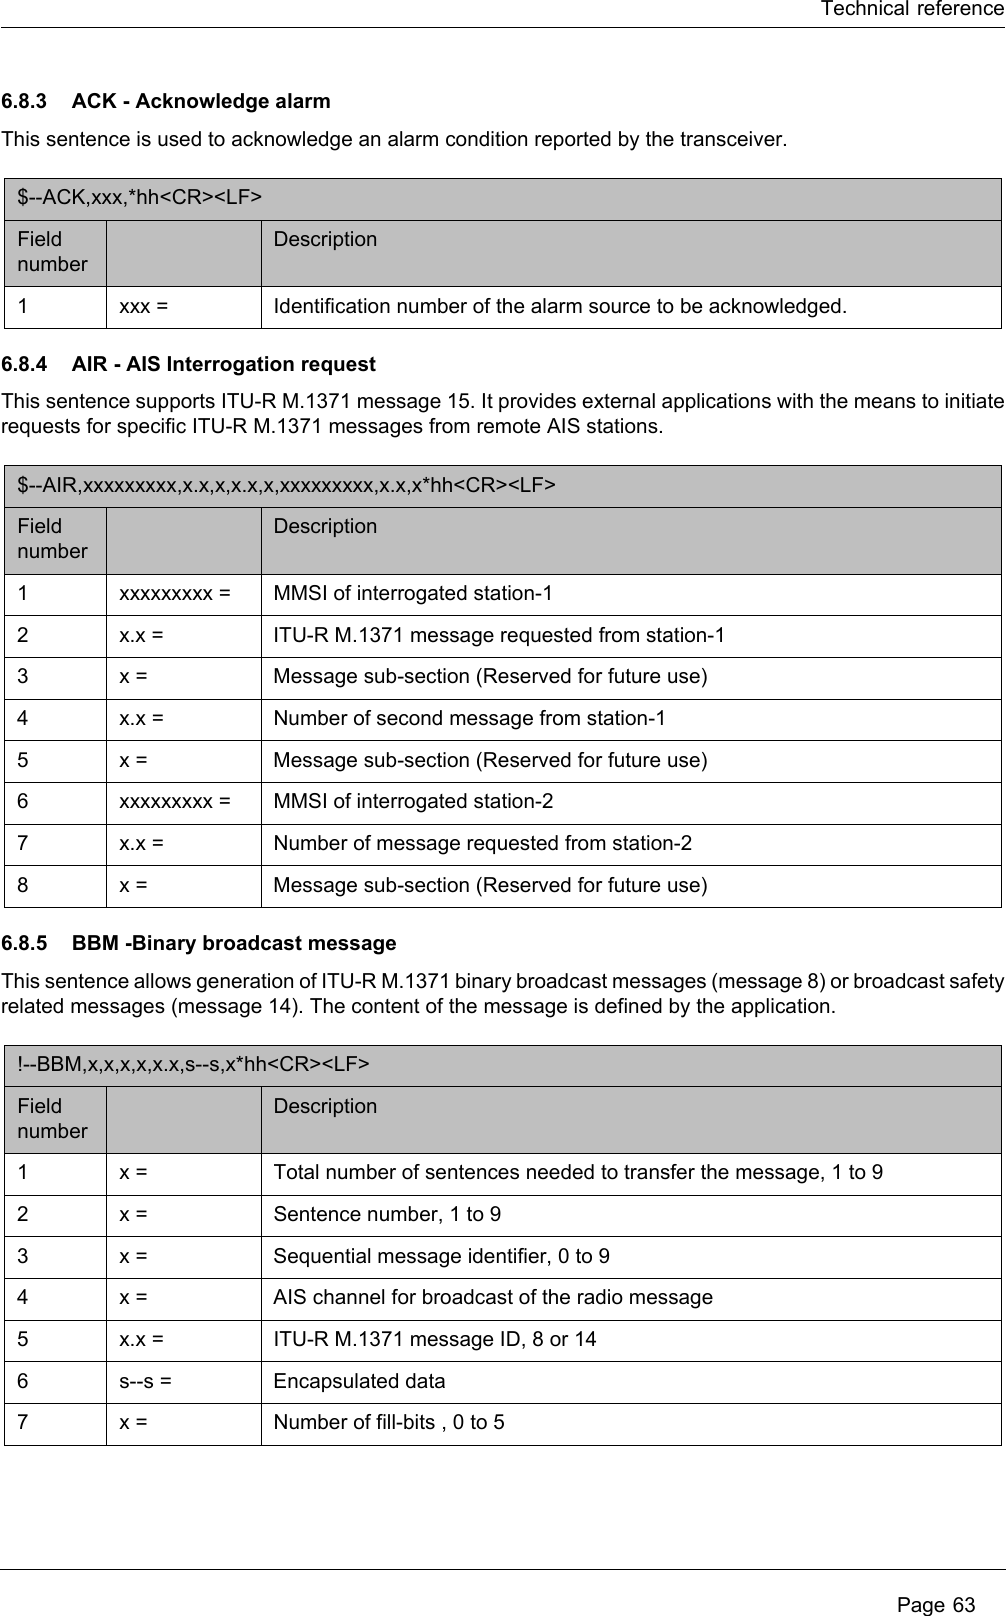 Technical referencePage 636.8.3 ACK - Acknowledge alarmThis sentence is used to acknowledge an alarm condition reported by the transceiver.6.8.4 AIR - AIS Interrogation requestThis sentence supports ITU-R M.1371 message 15. It provides external applications with the means to initiaterequests for specific ITU-R M.1371 messages from remote AIS stations.6.8.5 BBM -Binary broadcast messageThis sentence allows generation of ITU-R M.1371 binary broadcast messages (message 8) or broadcast safetyrelated messages (message 14). The content of the message is defined by the application.$--ACK,xxx,*hh&lt;CR&gt;&lt;LF&gt; Field numberDescription1 xxx =  Identification number of the alarm source to be acknowledged.$--AIR,xxxxxxxxx,x.x,x,x.x,x,xxxxxxxxx,x.x,x*hh&lt;CR&gt;&lt;LF&gt; Field numberDescription1 xxxxxxxxx =  MMSI of interrogated station-1 2 x.x = ITU-R M.1371 message requested from station-1 3 x = Message sub-section (Reserved for future use) 4 x.x = Number of second message from station-1 5 x = Message sub-section (Reserved for future use) 6 xxxxxxxxx = MMSI of interrogated station-2 7 x.x = Number of message requested from station-2 8 x = Message sub-section (Reserved for future use) !--BBM,x,x,x,x,x.x,s--s,x*hh&lt;CR&gt;&lt;LF&gt; Field numberDescription1 x =  Total number of sentences needed to transfer the message, 1 to 9 2 x =  Sentence number, 1 to 9 3 x =  Sequential message identifier, 0 to 9 4 x =  AIS channel for broadcast of the radio message 5 x.x =  ITU-R M.1371 message ID, 8 or 14 6 s--s =  Encapsulated data 7 x =  Number of fill-bits , 0 to 5 